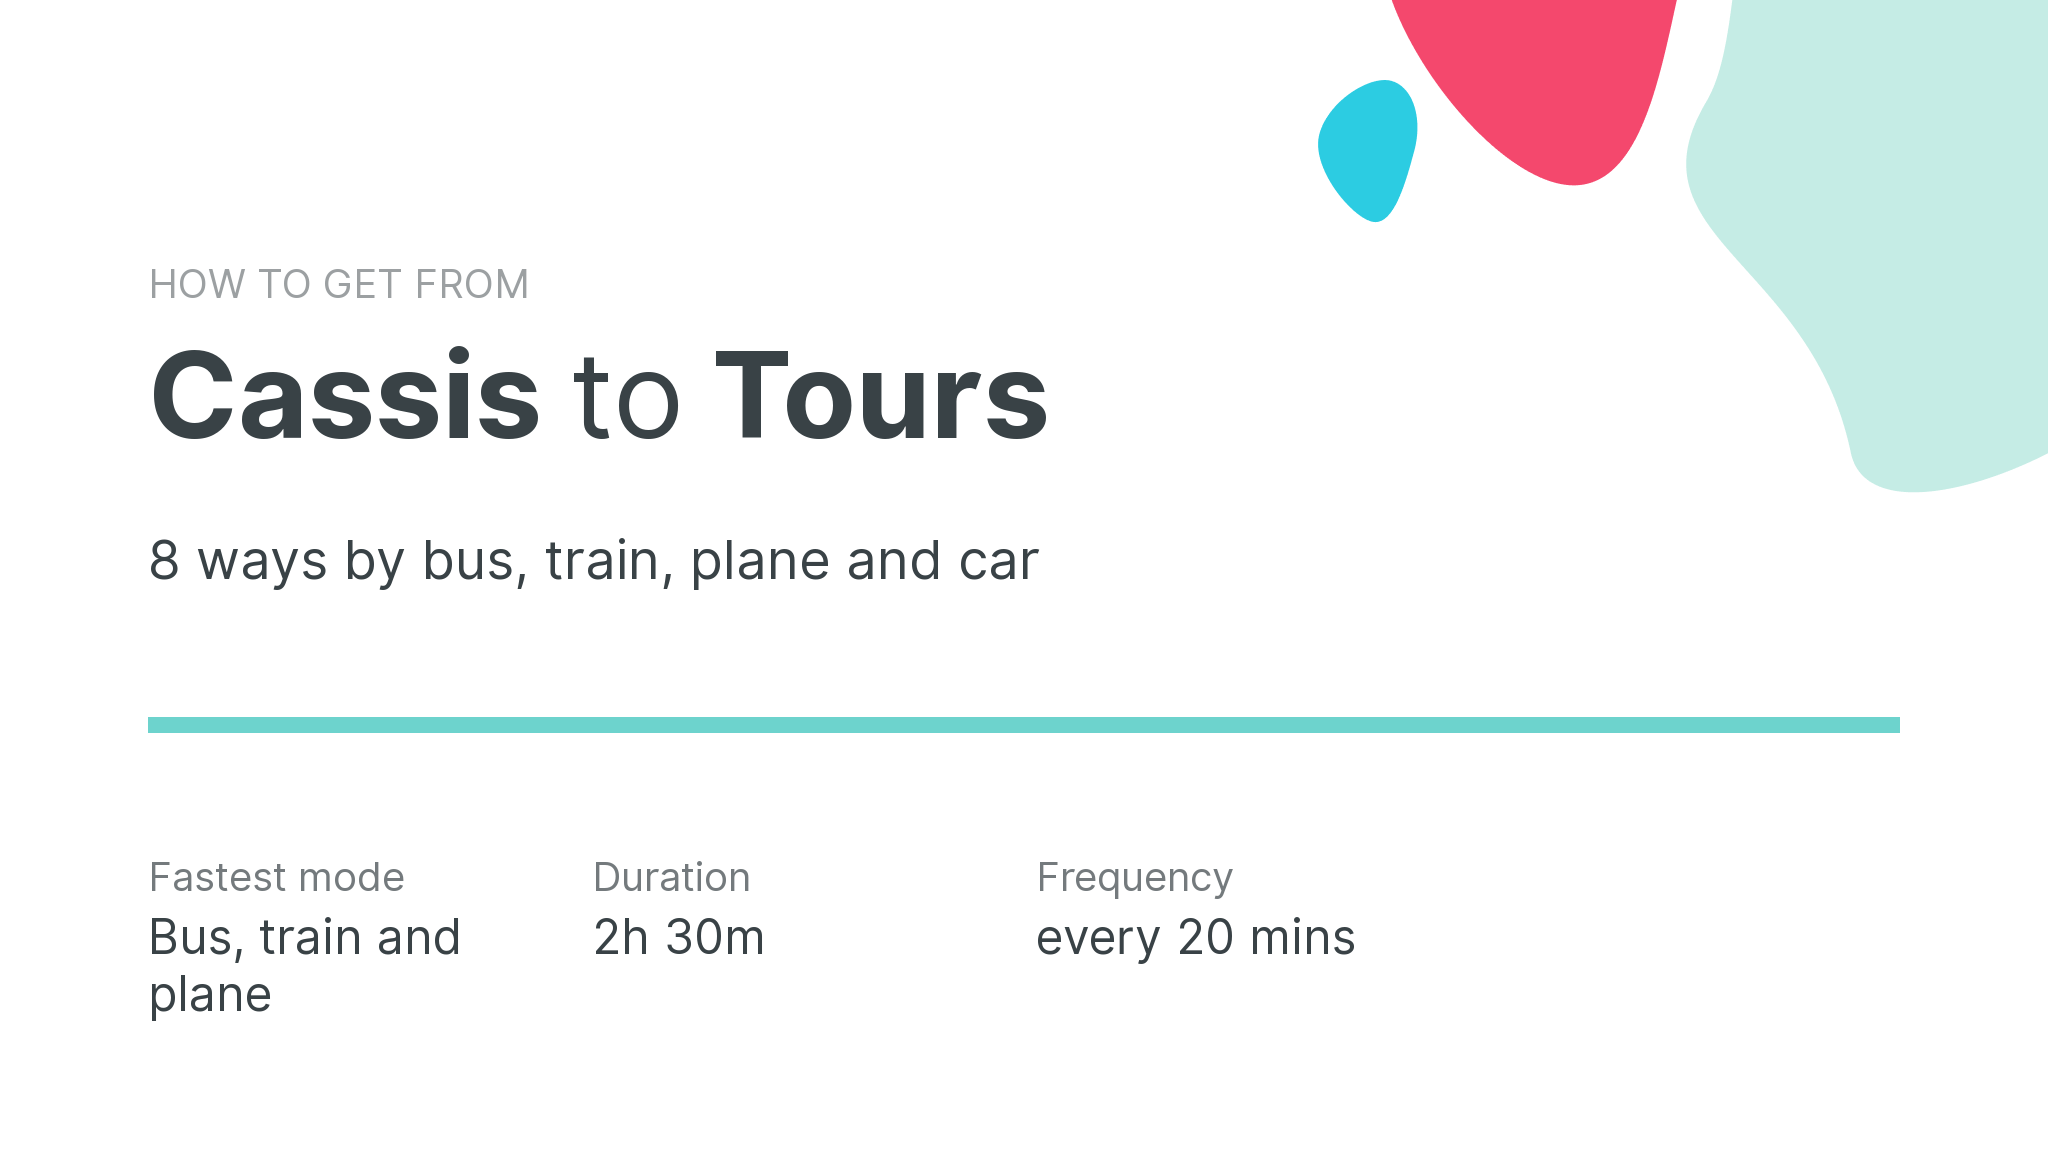 How do I get from Cassis to Tours